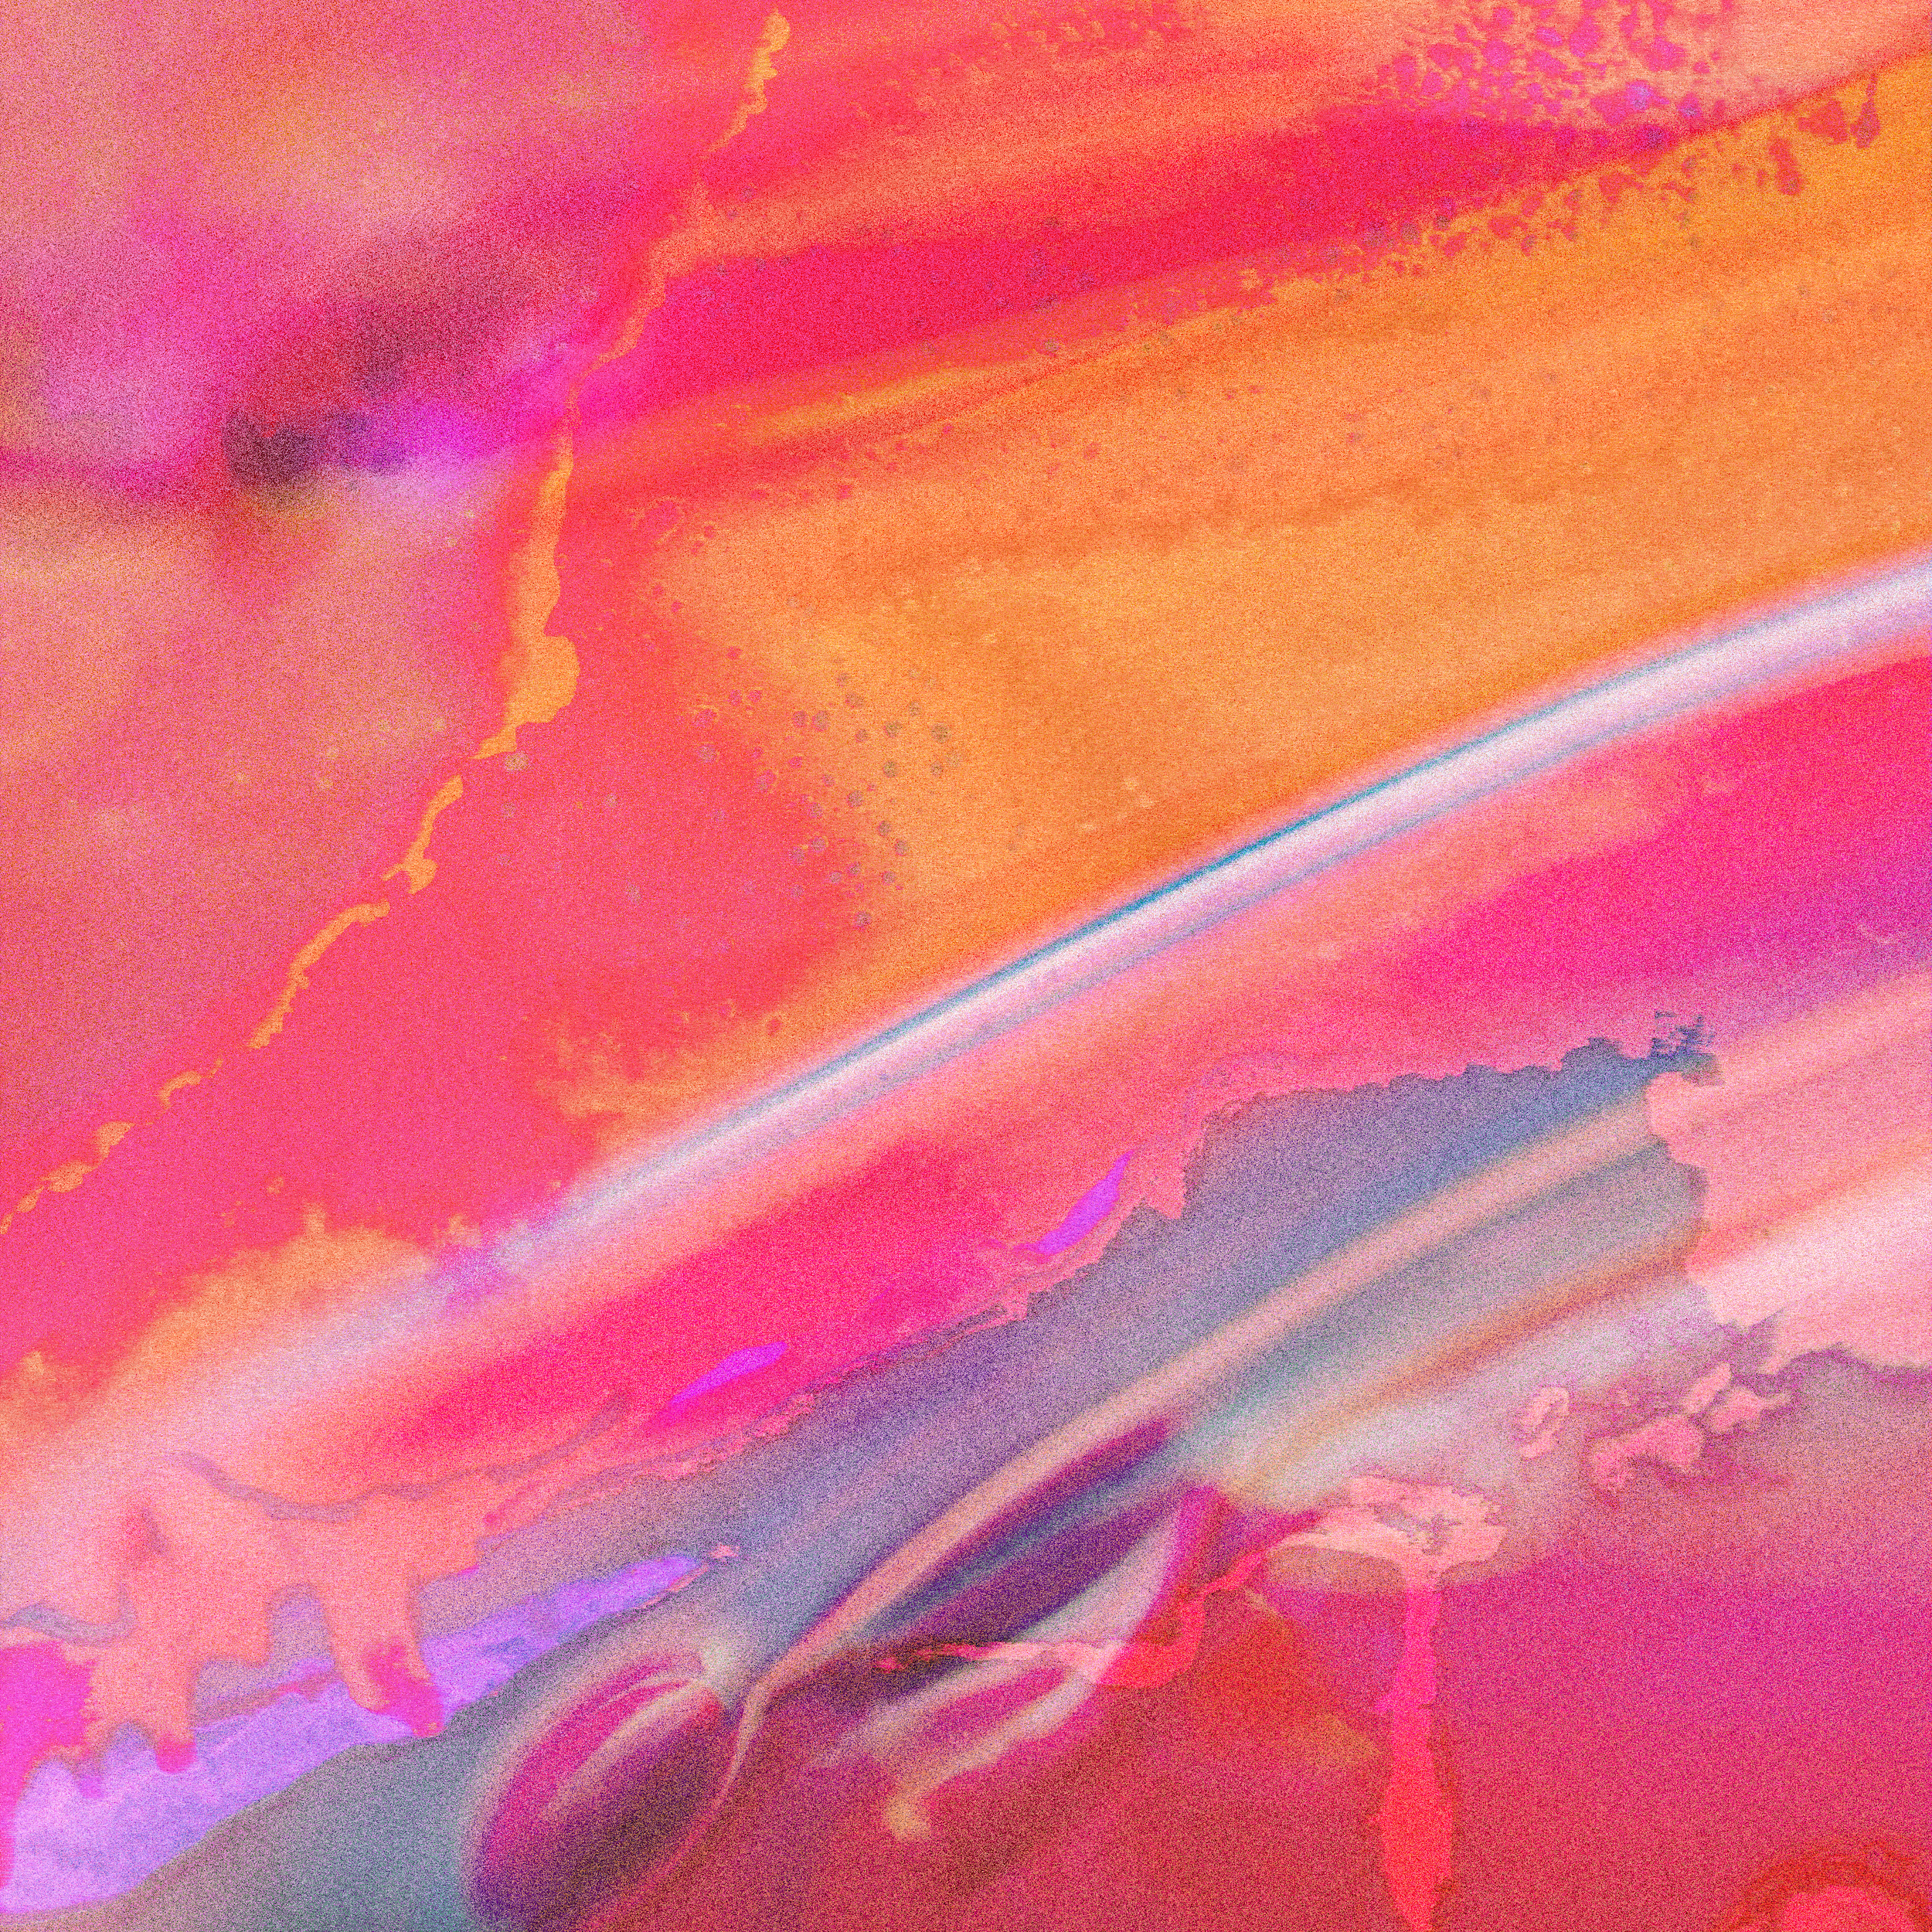 Cover art for familiar by slenderbodies